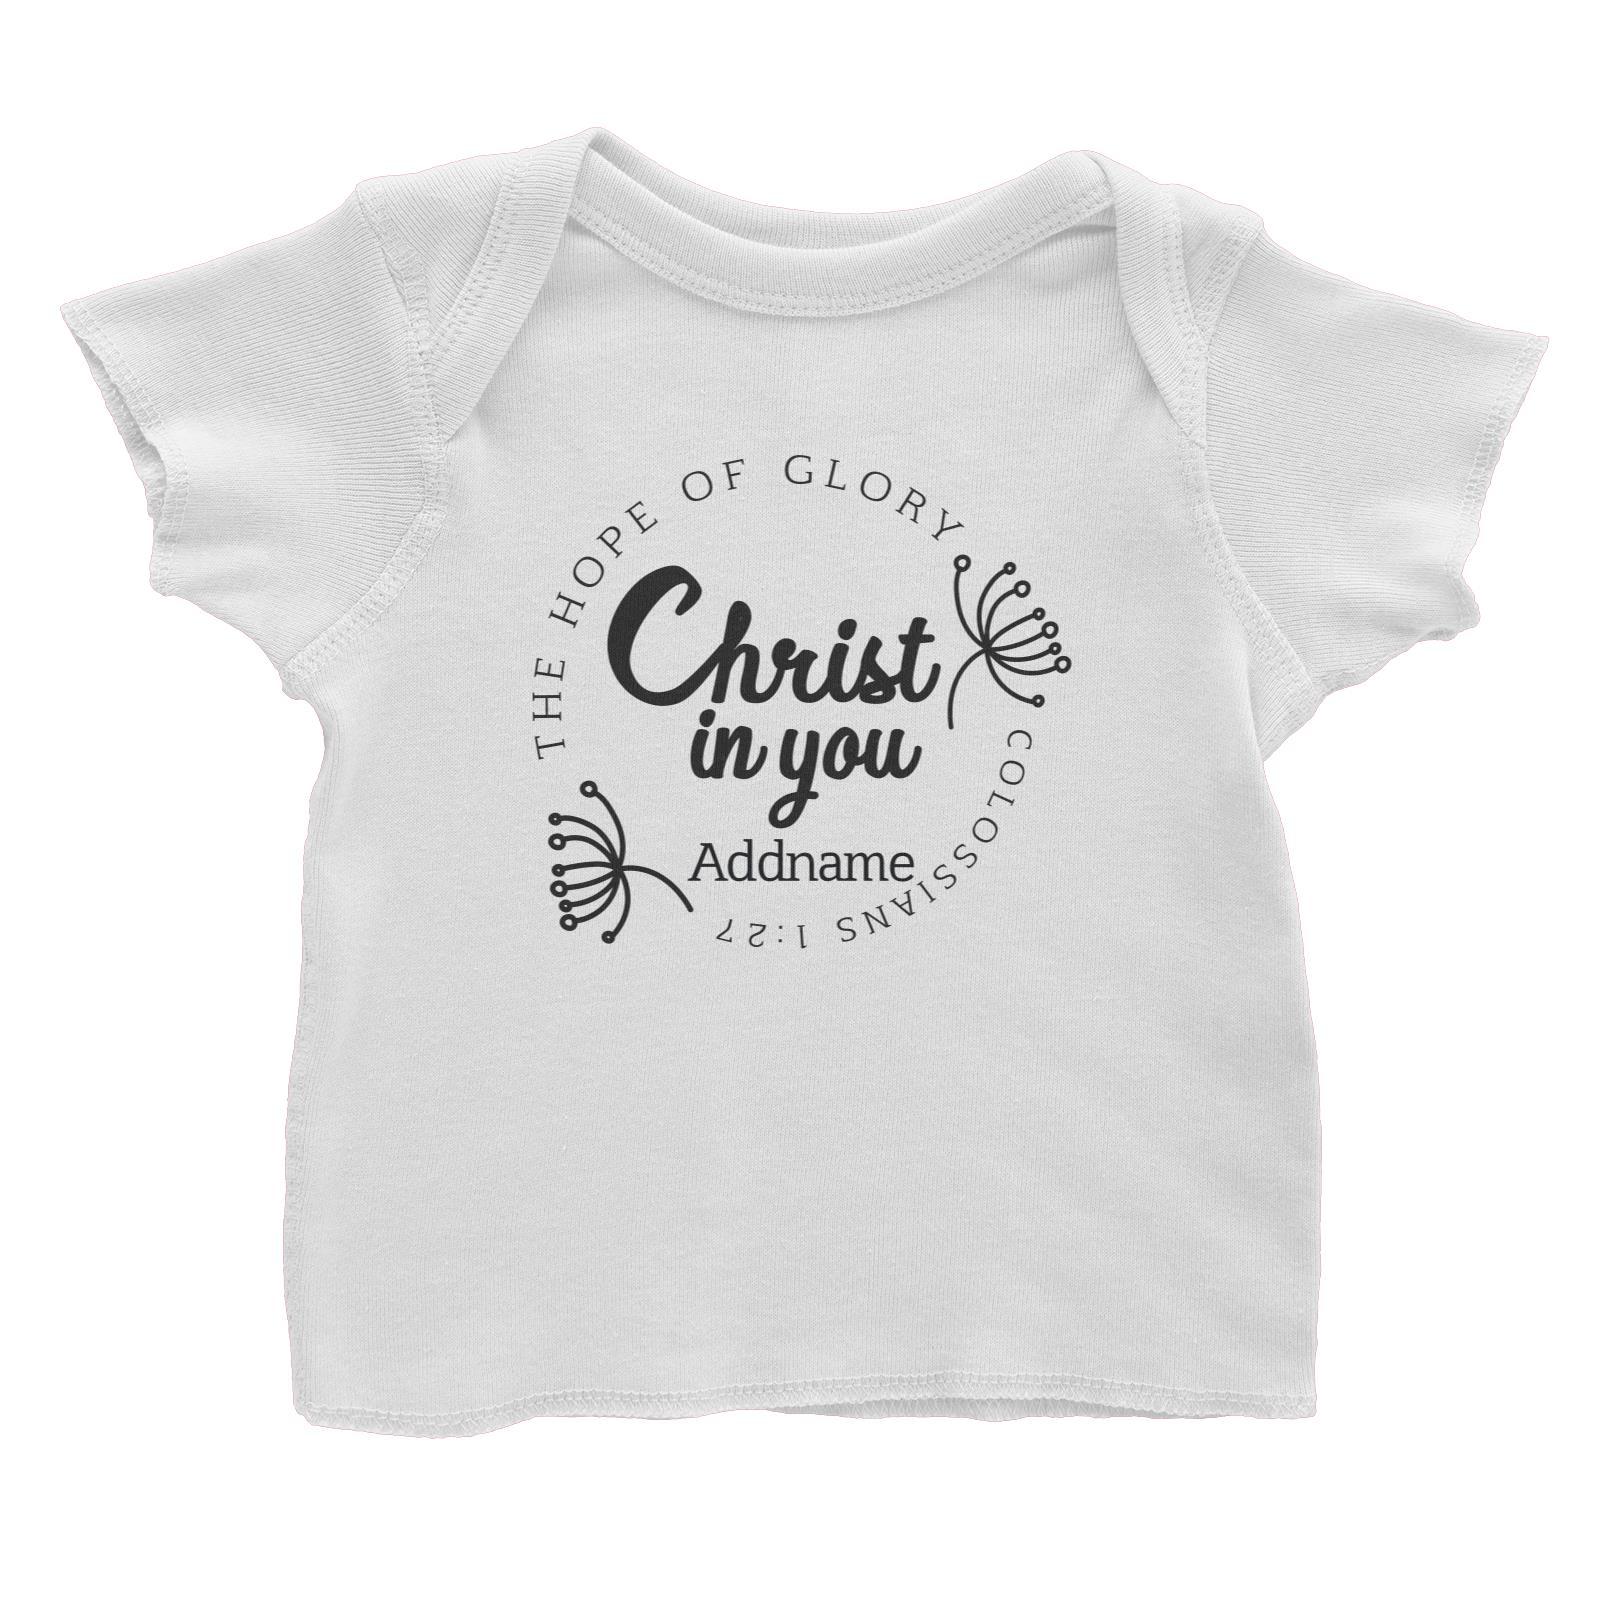 Christian Series The Hope Of Glory Christ In You Colossians 1.27 Addname Baby T-Shirt